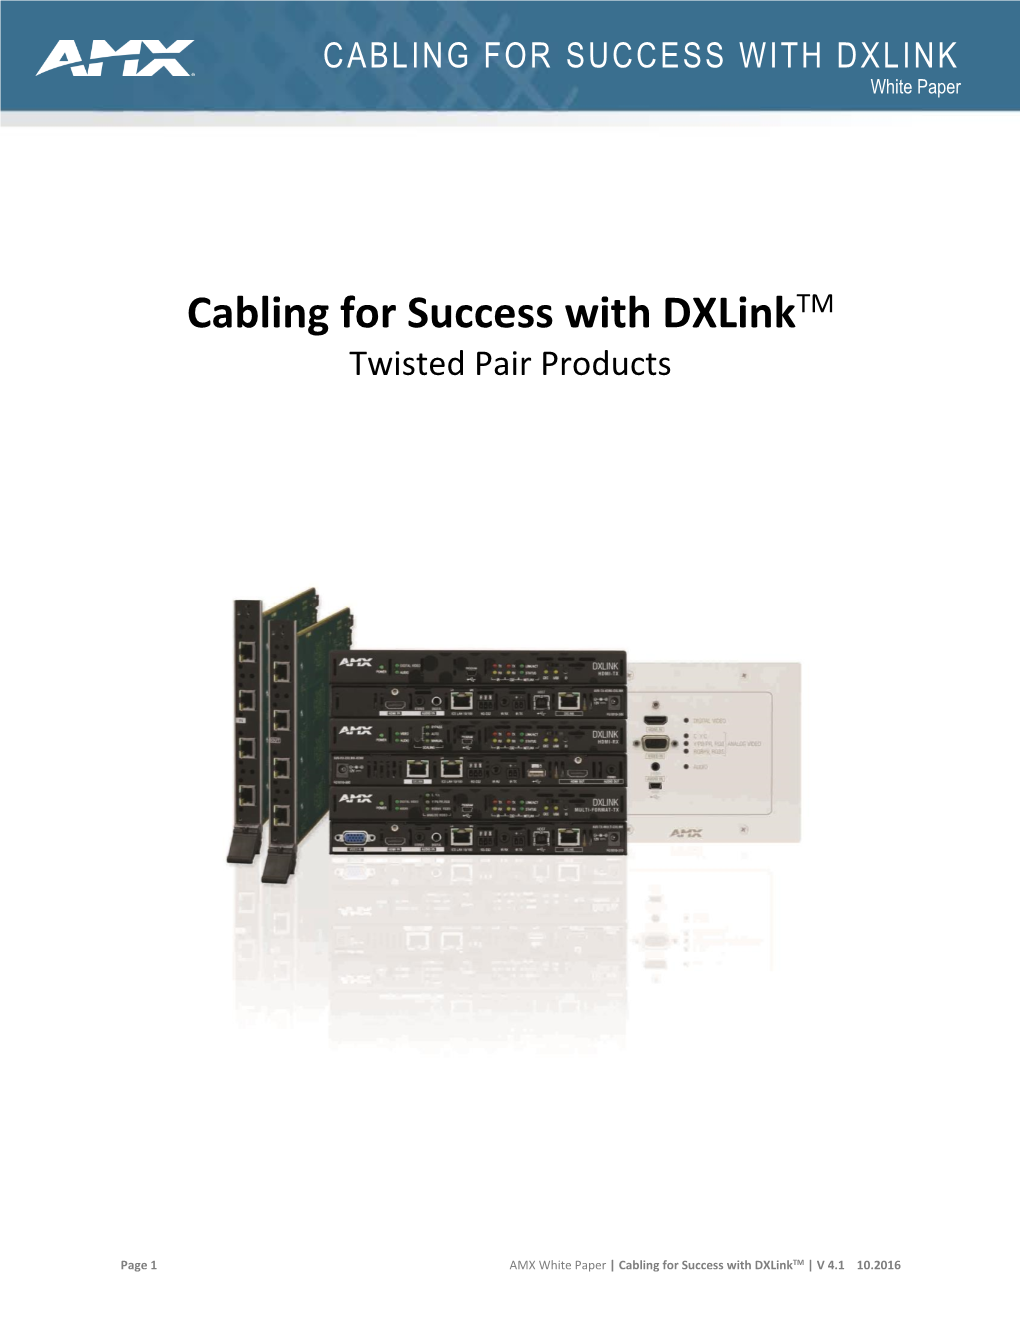 CABLING for SUCCESS with DXLINK White Paper